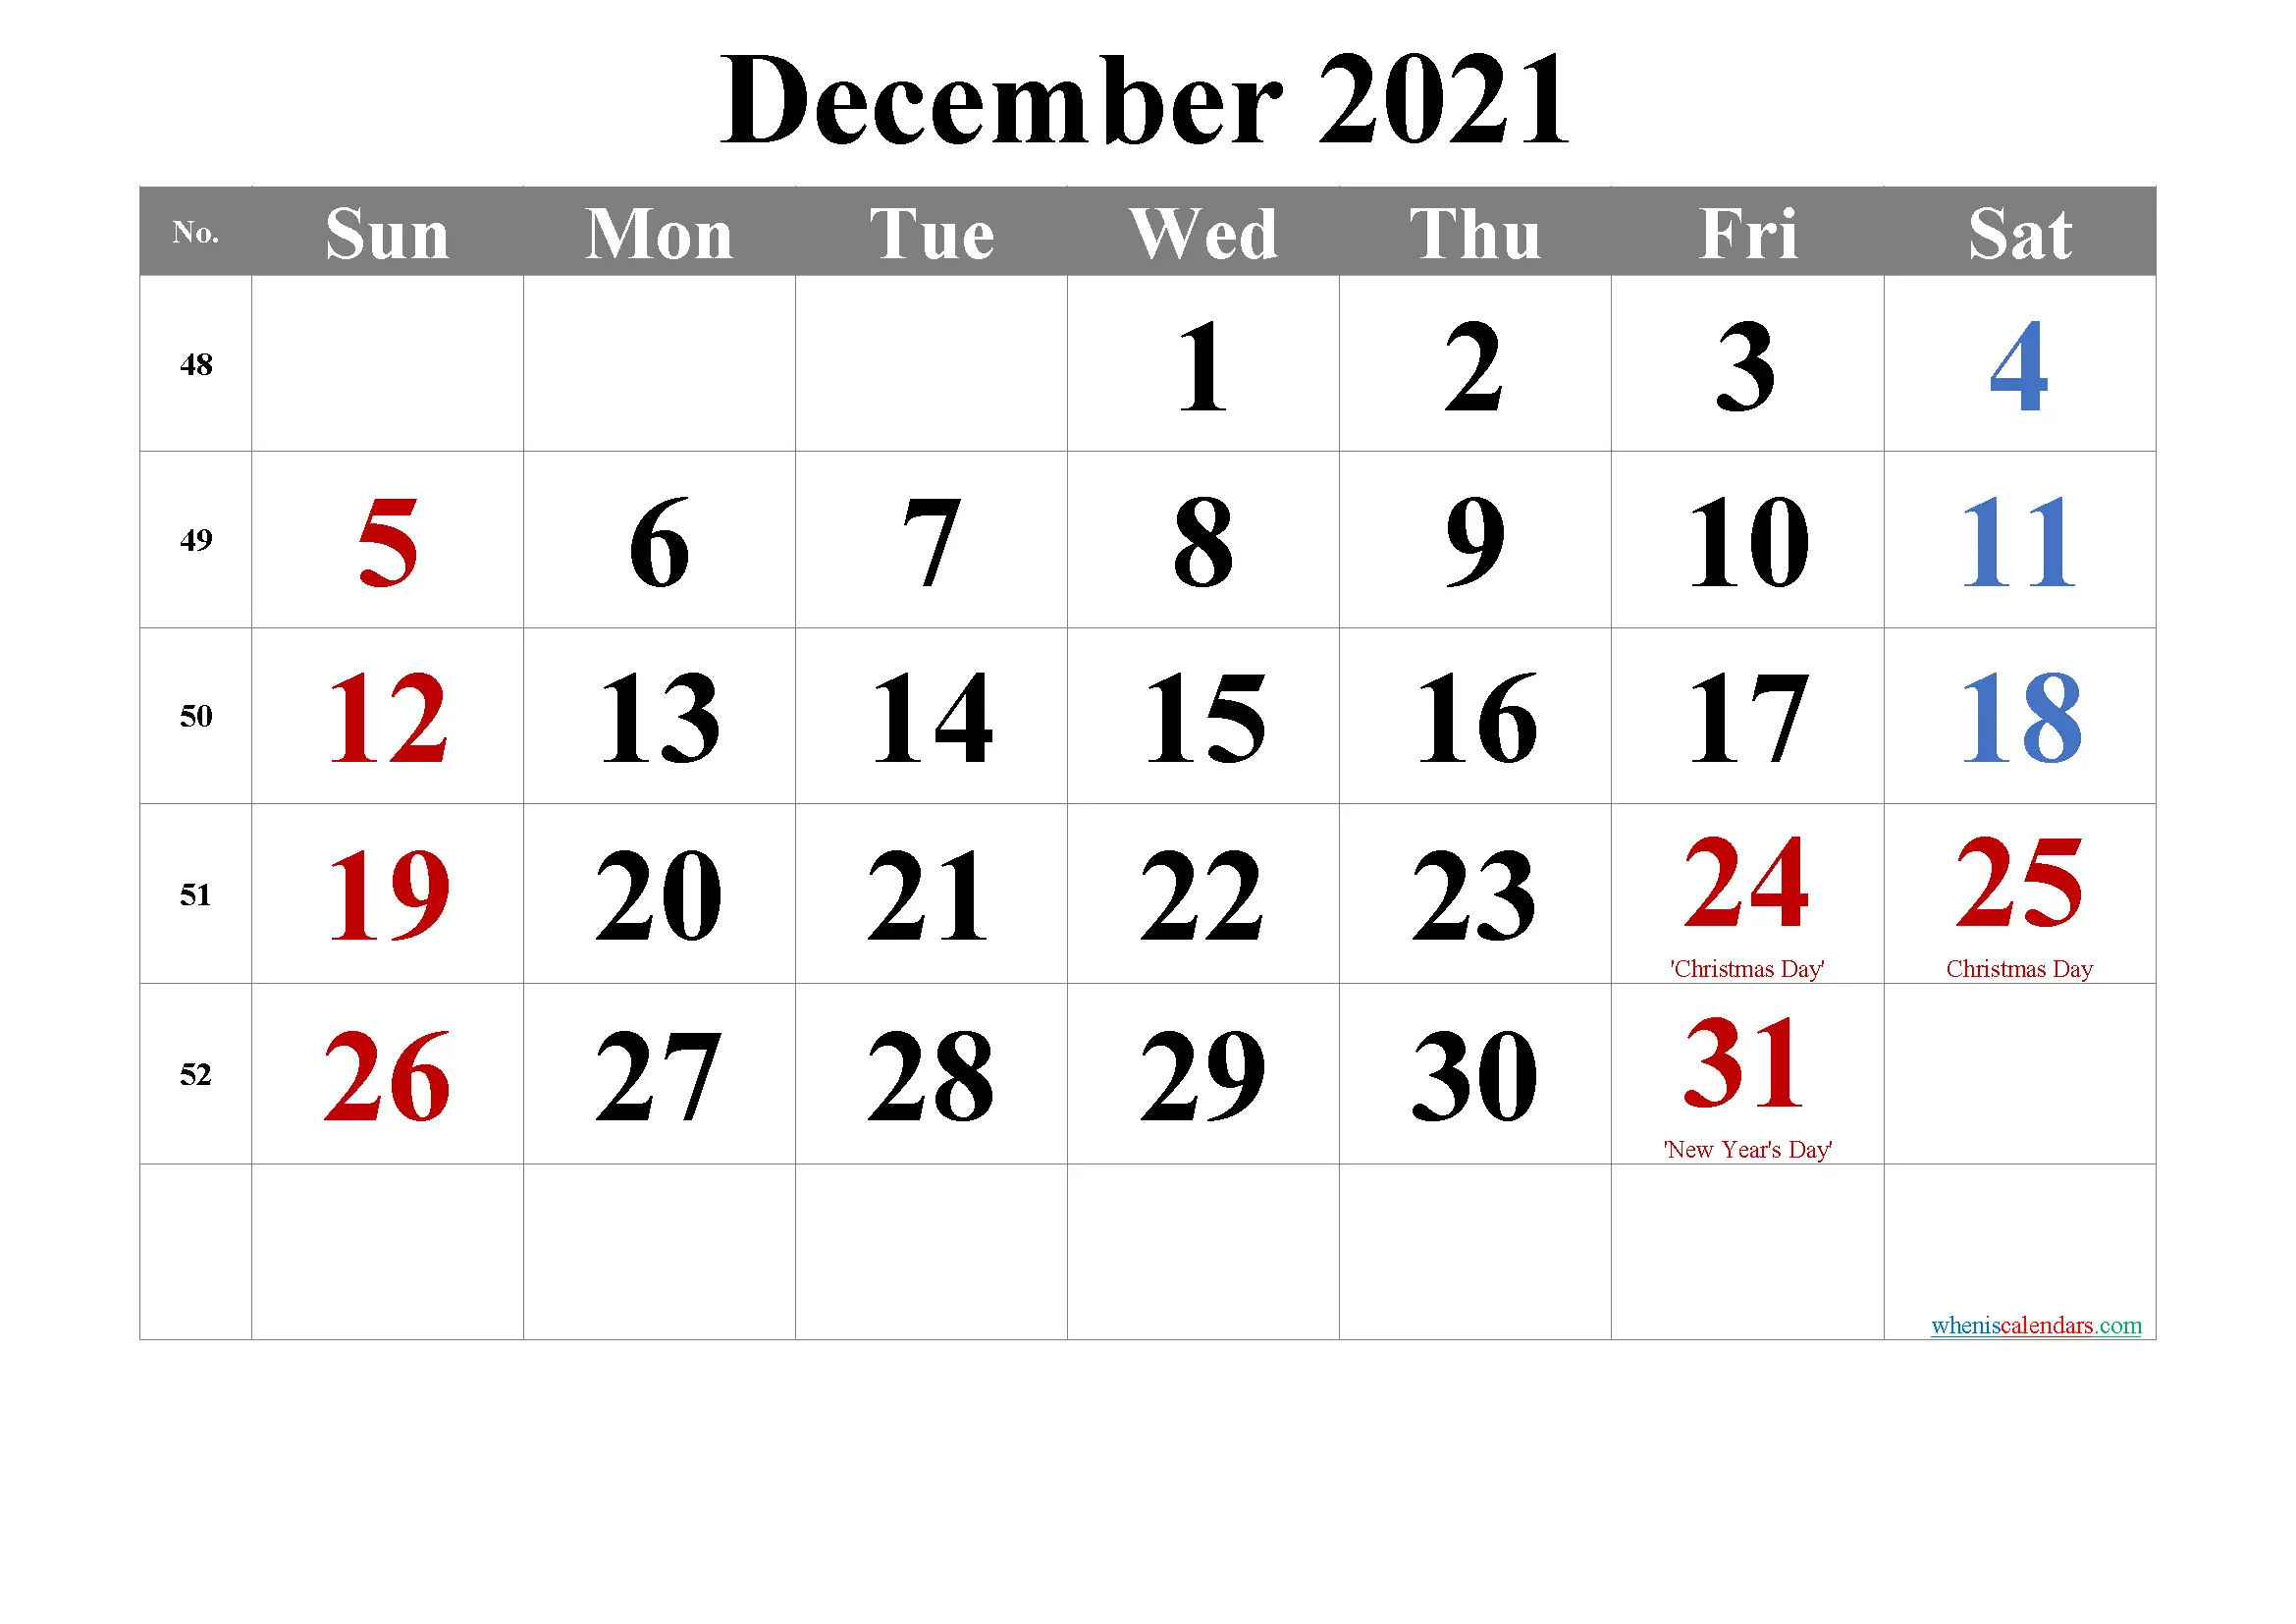 how long ago was december 2021